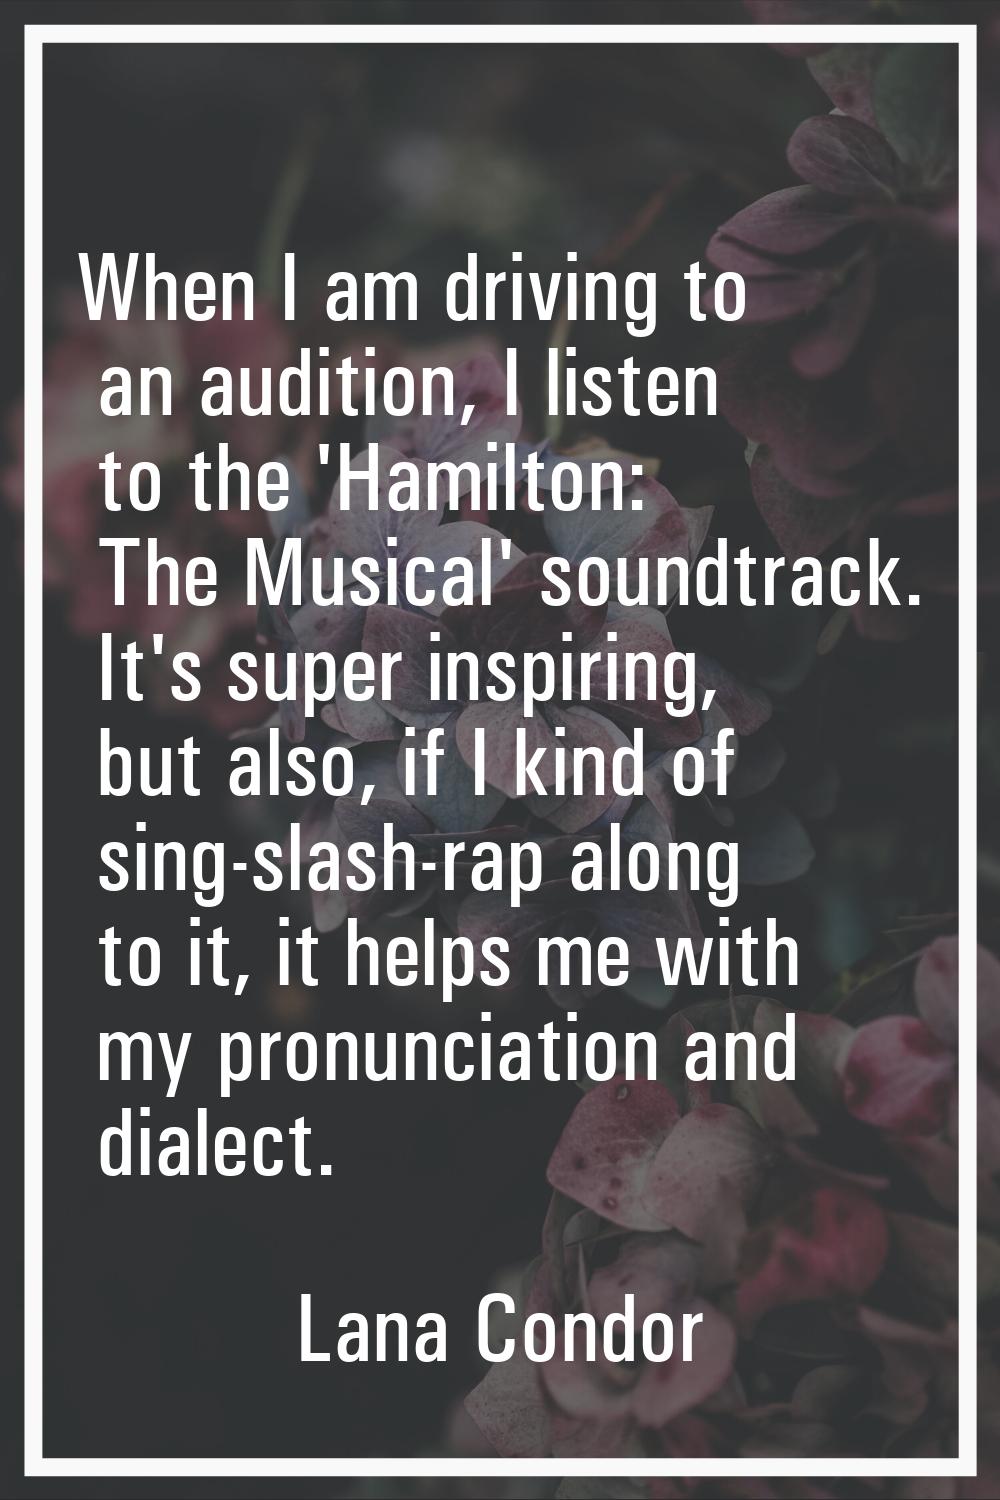 When I am driving to an audition, I listen to the 'Hamilton: The Musical' soundtrack. It's super in